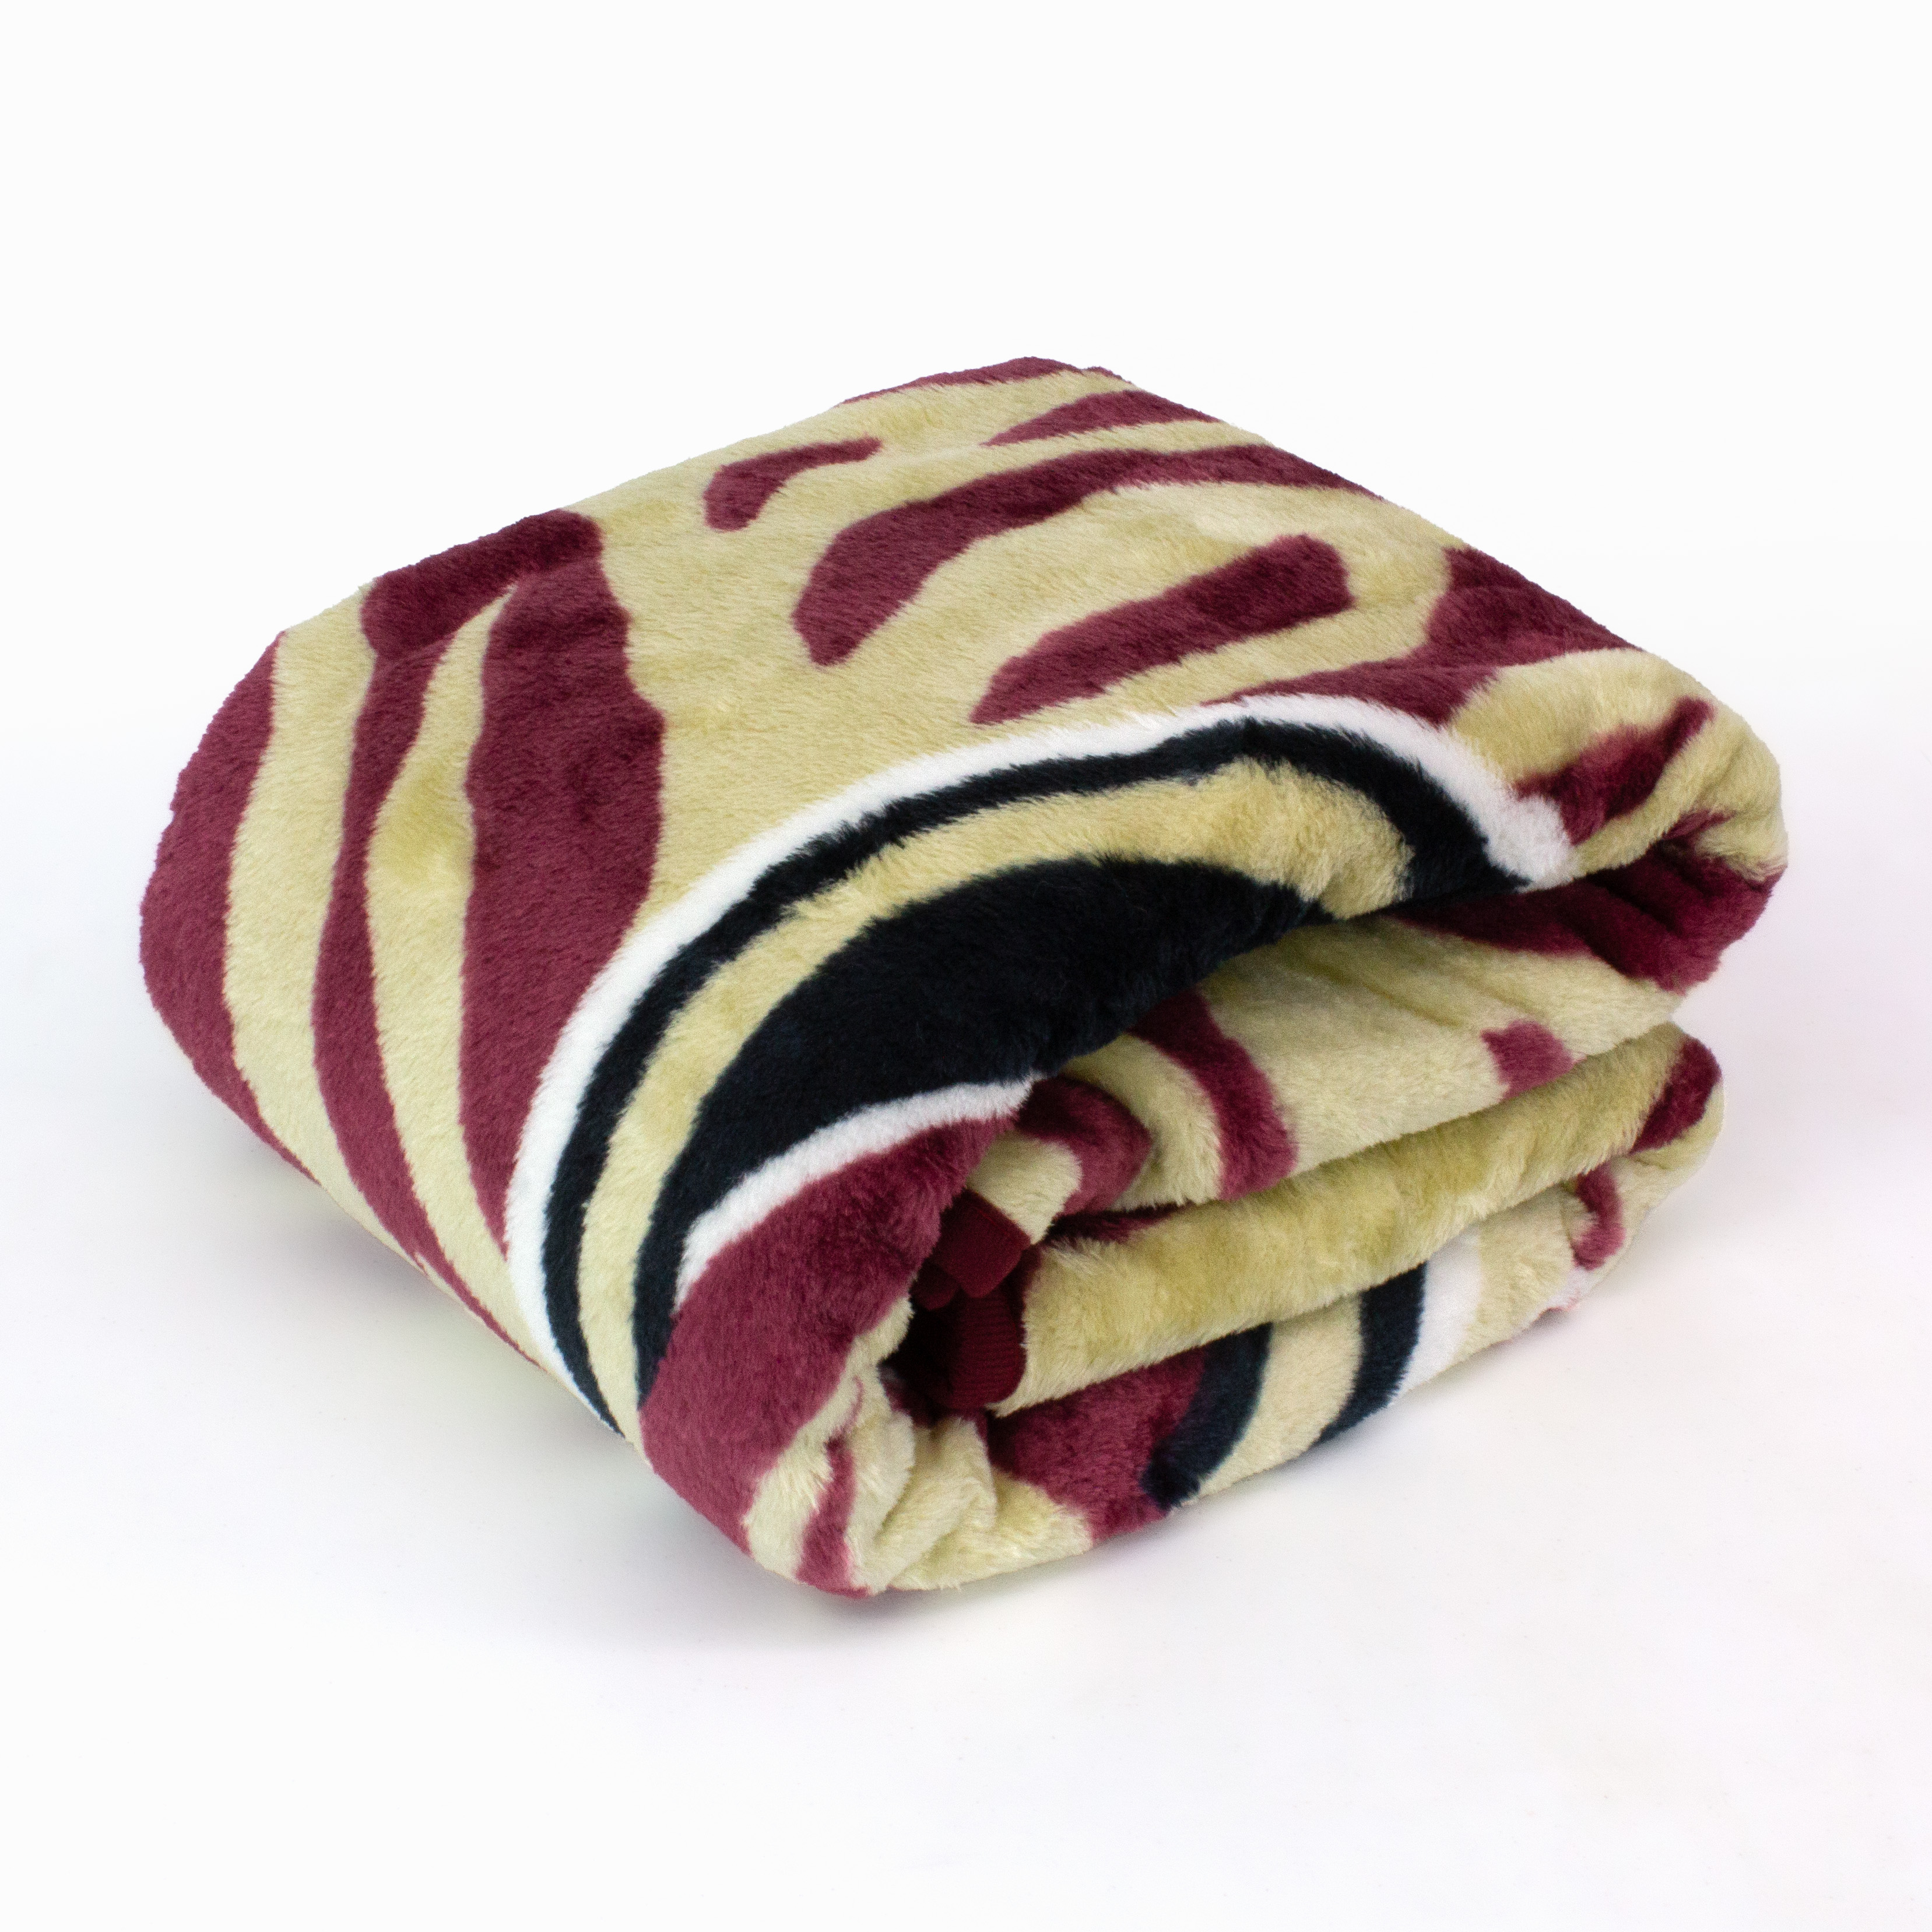 College Covers Everything Comfy Florida State Seminoles Soft Raschel Throw Blanket, 60" x 50" - image 4 of 8